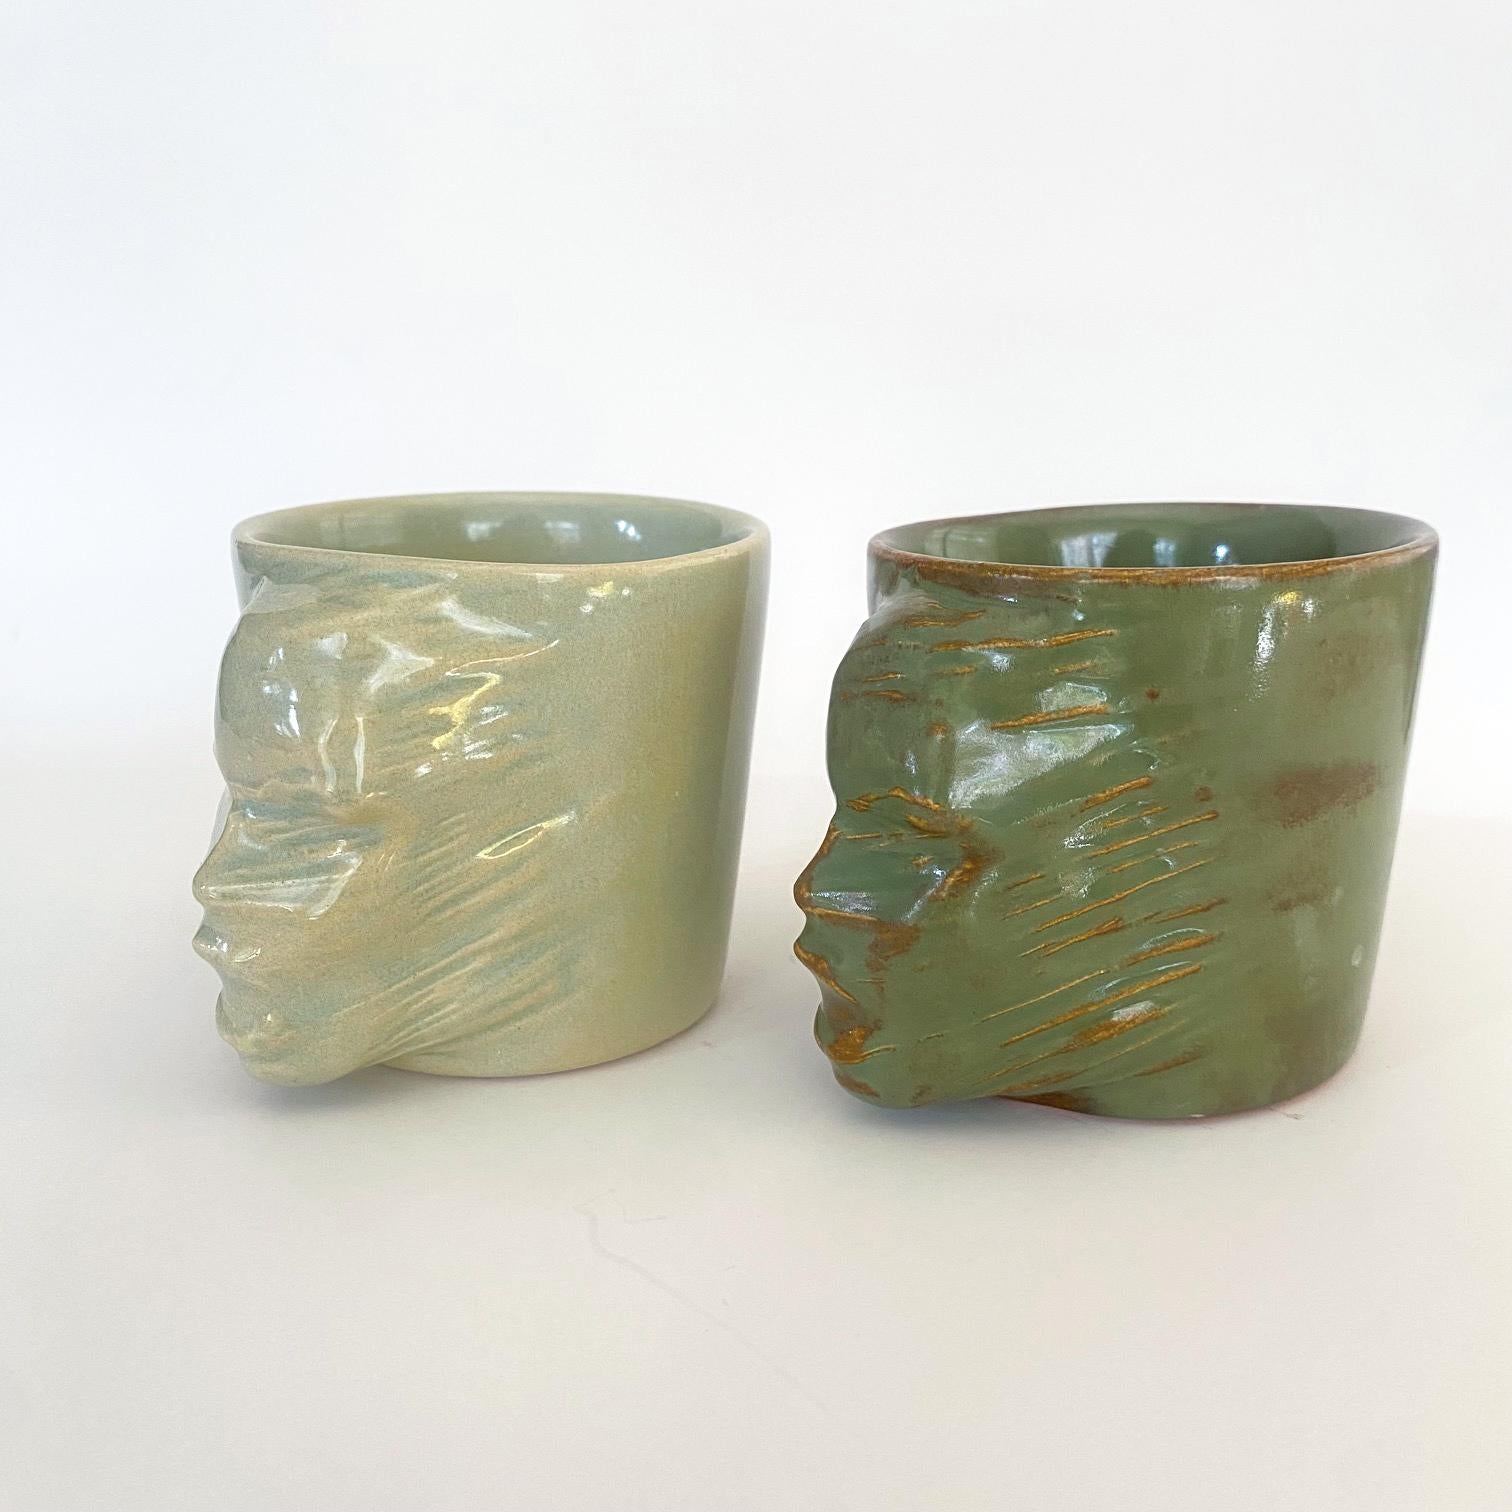 A set of 2 sculptural ceramic cups handmade by the ceramic artist Hulya Sozer. 
Food safe glaze.
Dishwasher safe.

Height: 7cm / Depth: 9cm / Diameter: 7cm
Volume: 120ml
Set includes 2 ceramic cups of 120ml

* Colors may slightly vary due to every